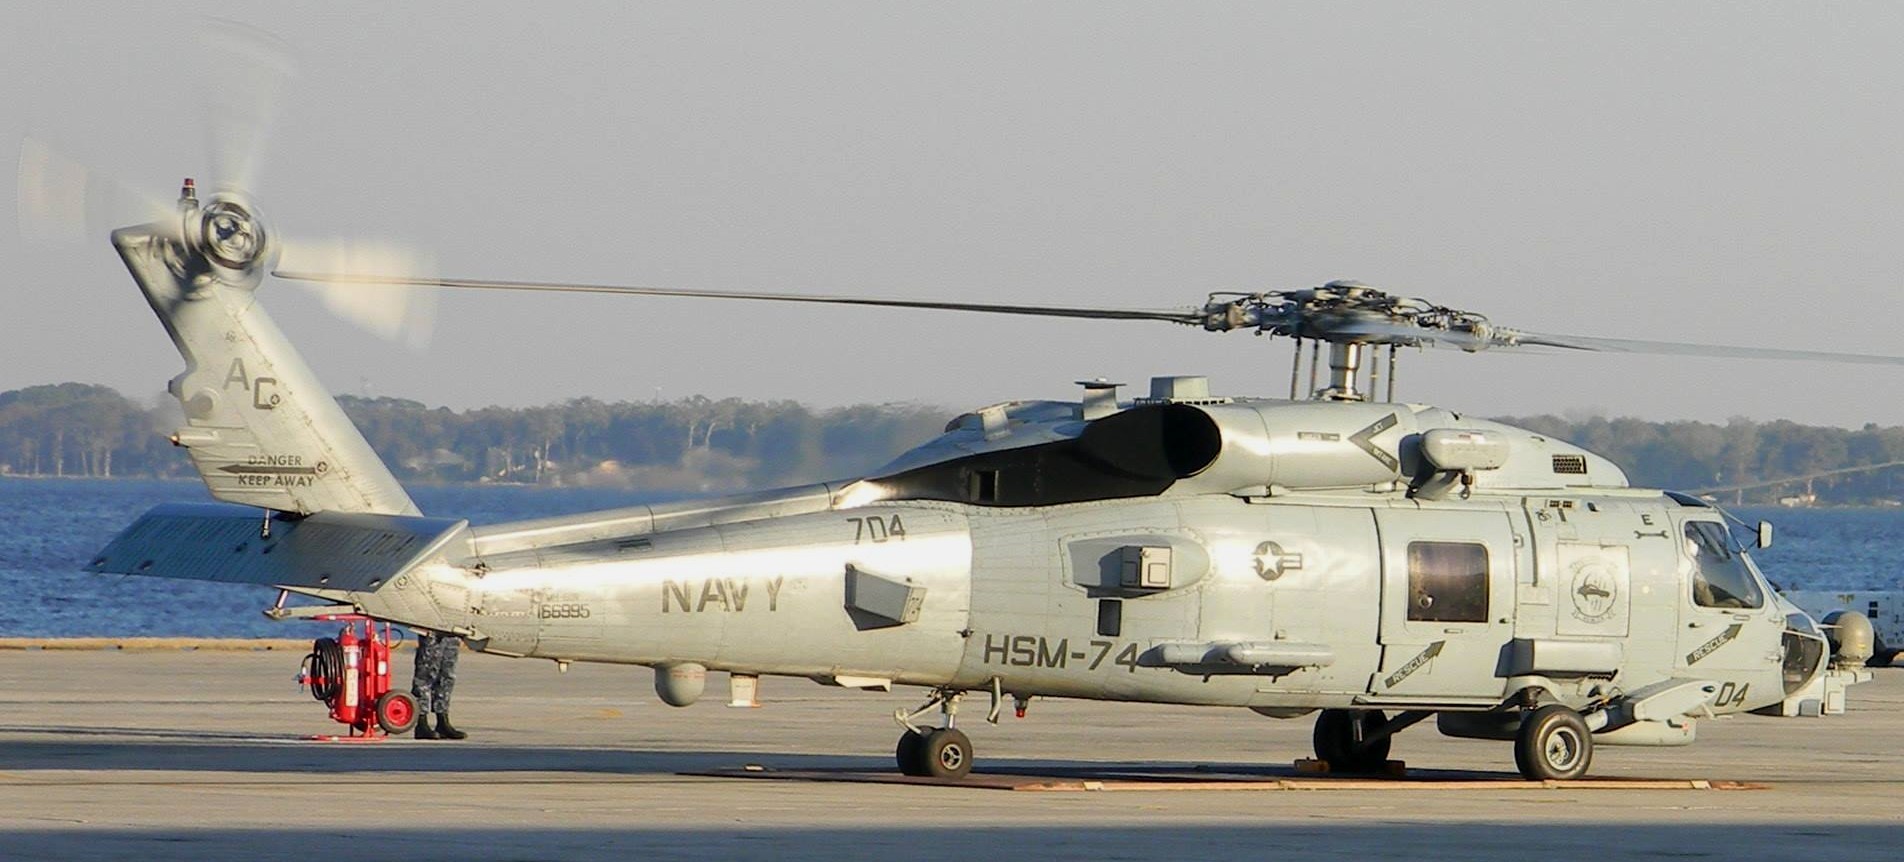 hsm-74 swamp foxes helicopter maritime strike squadron us navy mh-60r seahawk 2015 44